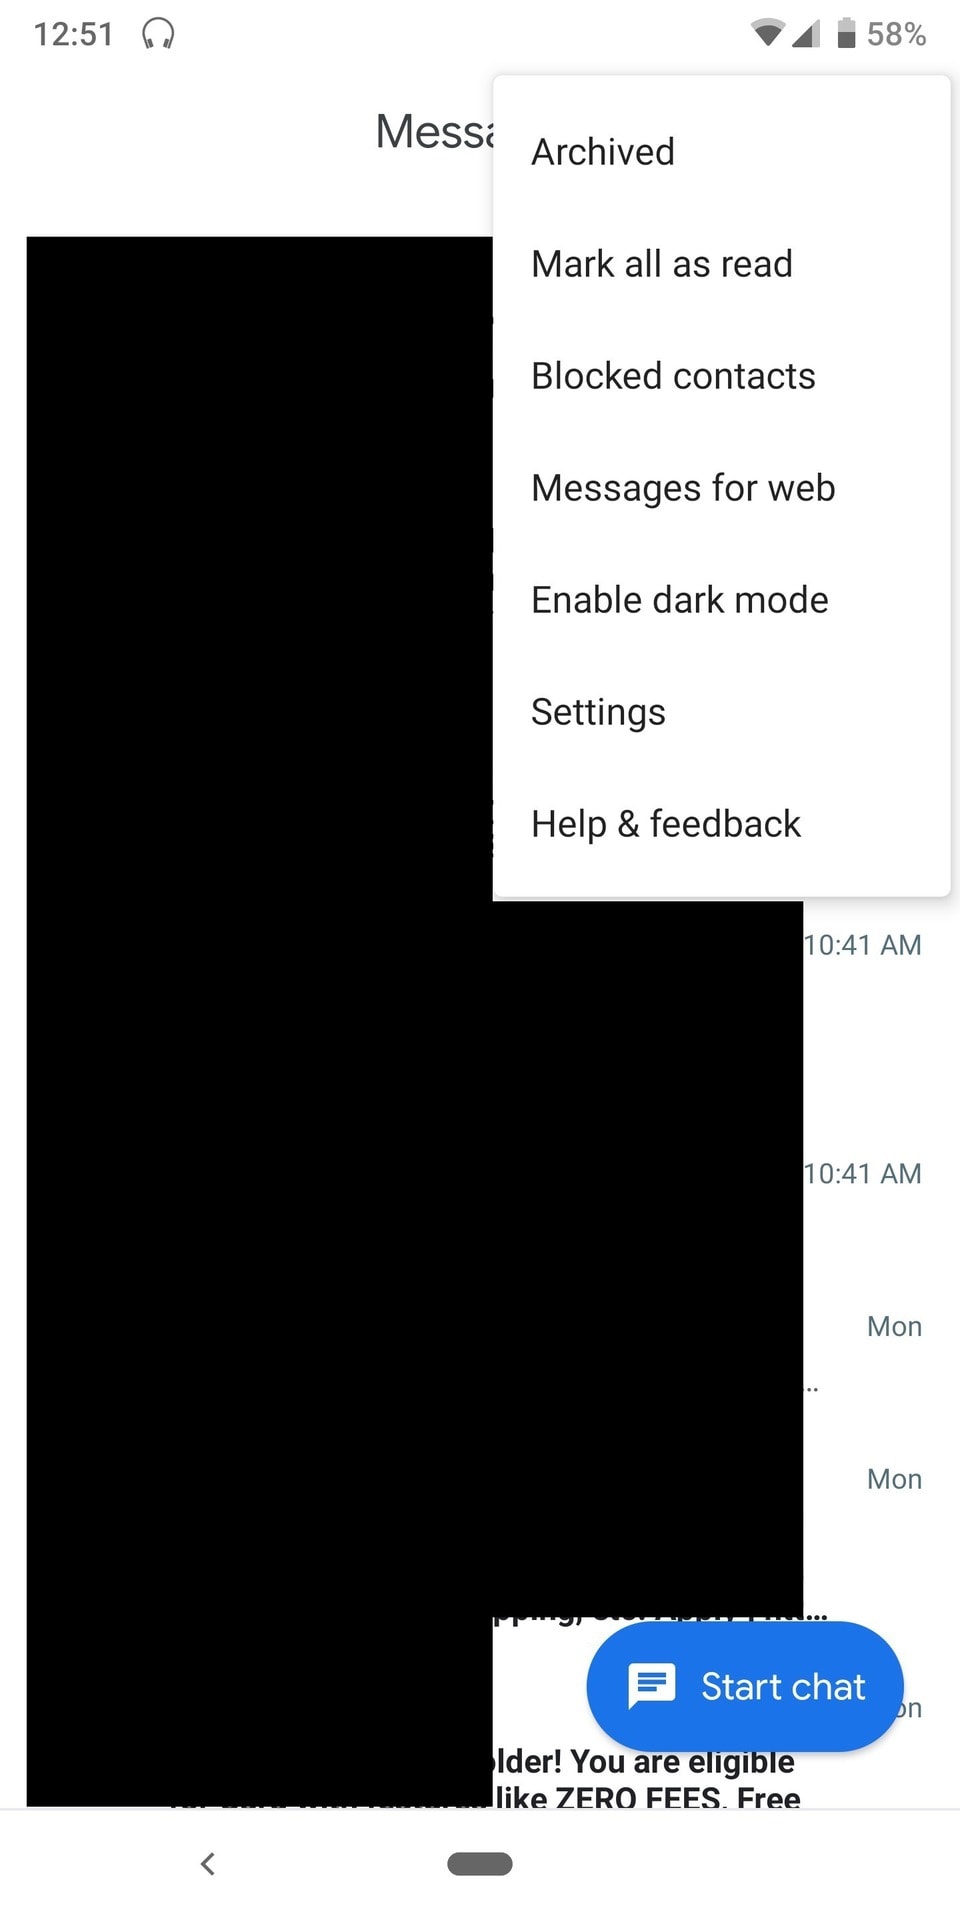 how to enable messages for web using the android app